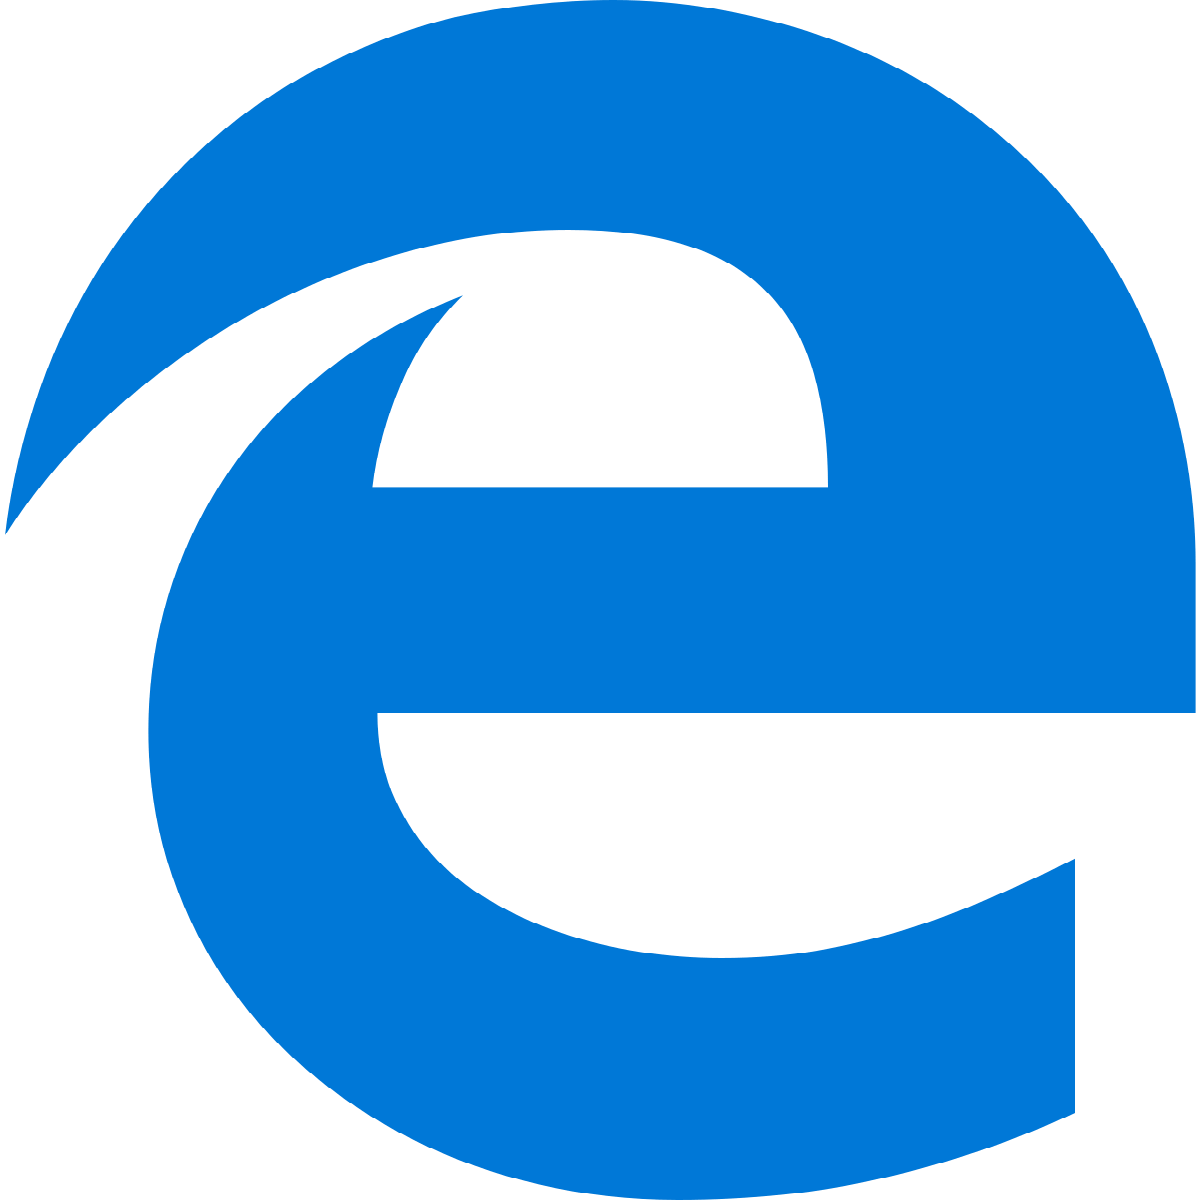 Microosft removes IE mode from Edge